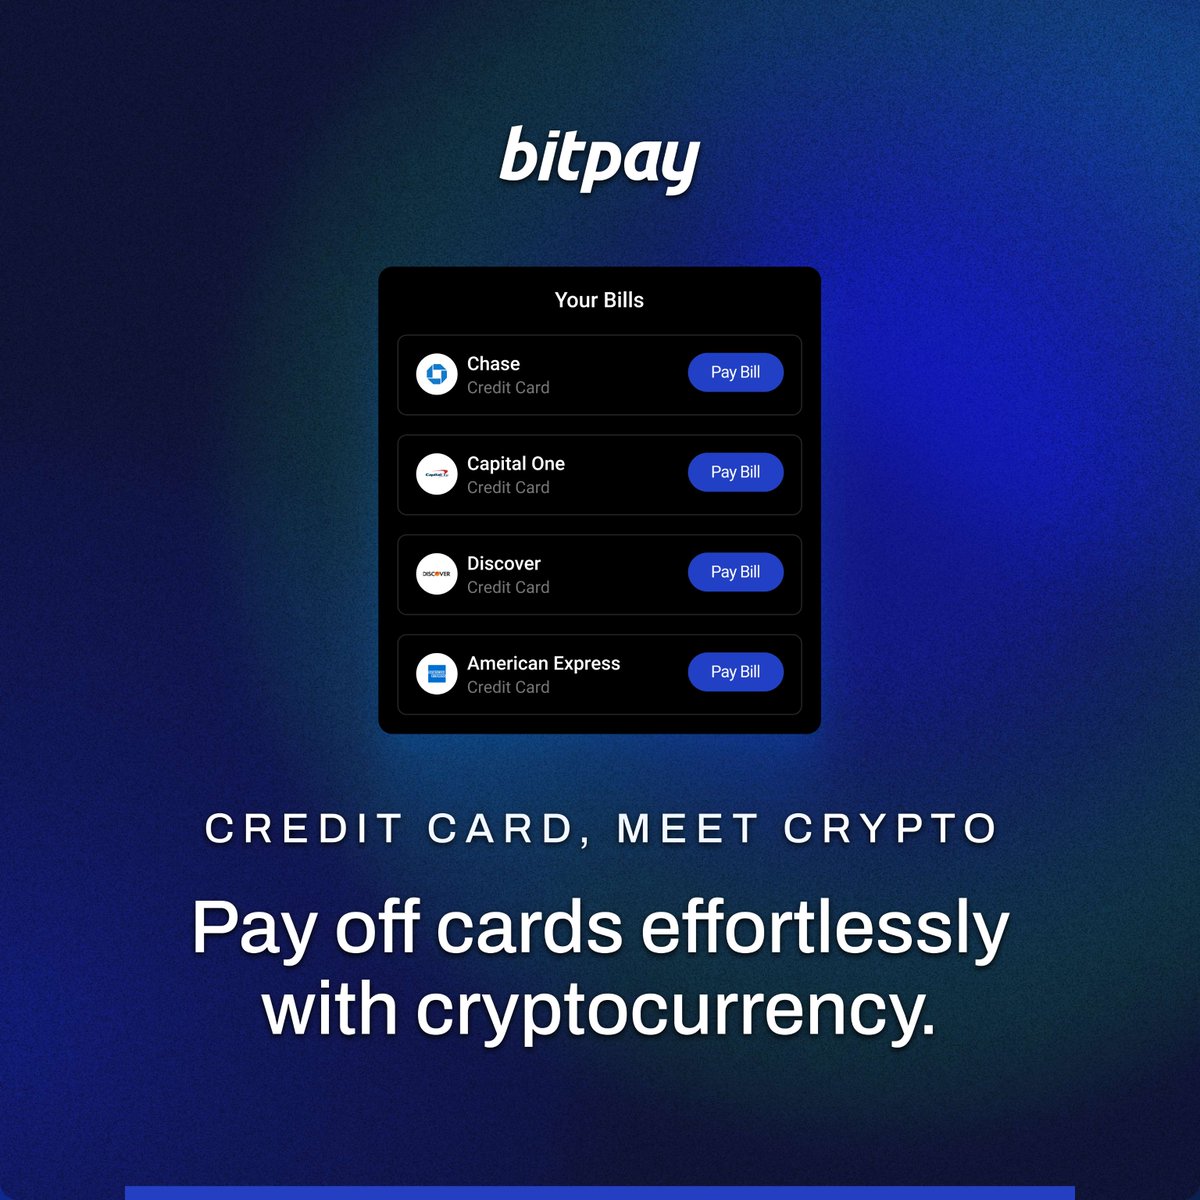 ✅ Pay no fees now through June 30th ✅ Practically any mortgage lender ✅ 100+ cryptocurrencies supported - BTC, LTC, ETH, DOGE + more ✅ Wipe mortgage debt monthly or all in one transaction Get the app or sign up: bitpay.onelink.me/Cenw/741iawkm #BitPay #Bitcoin #crypto